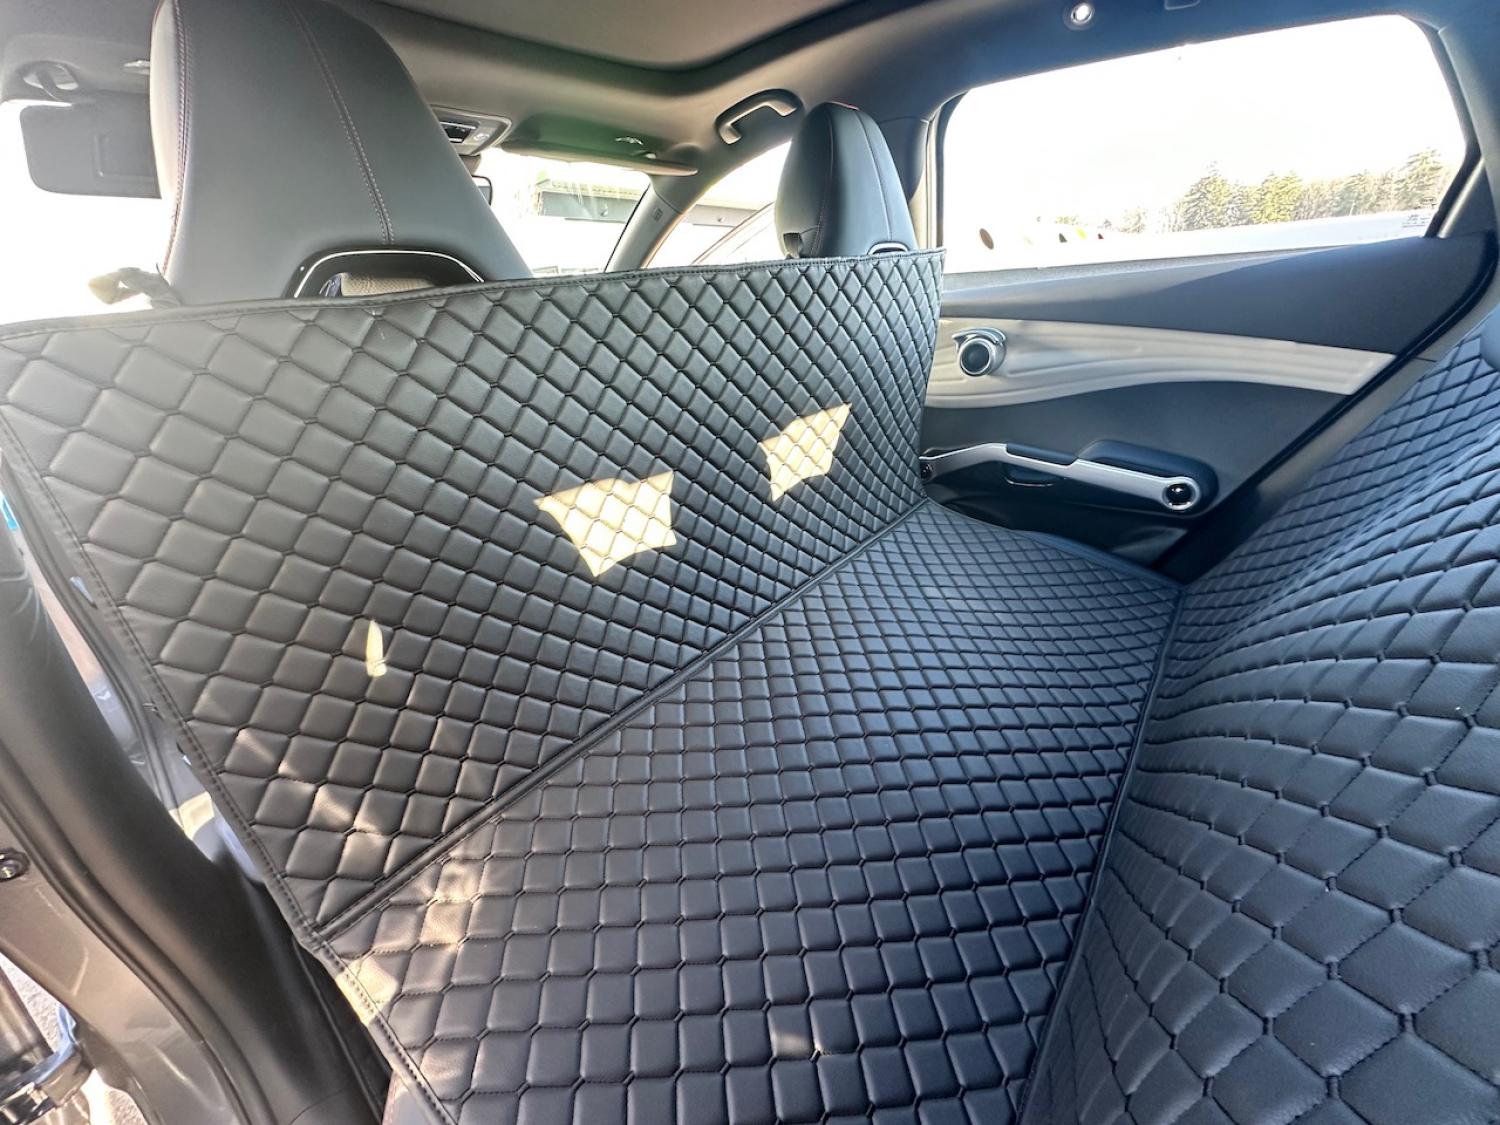 CARSTYLER® Back Seat Cover Geeignet Für Ford Kuga 13, 2012-2019